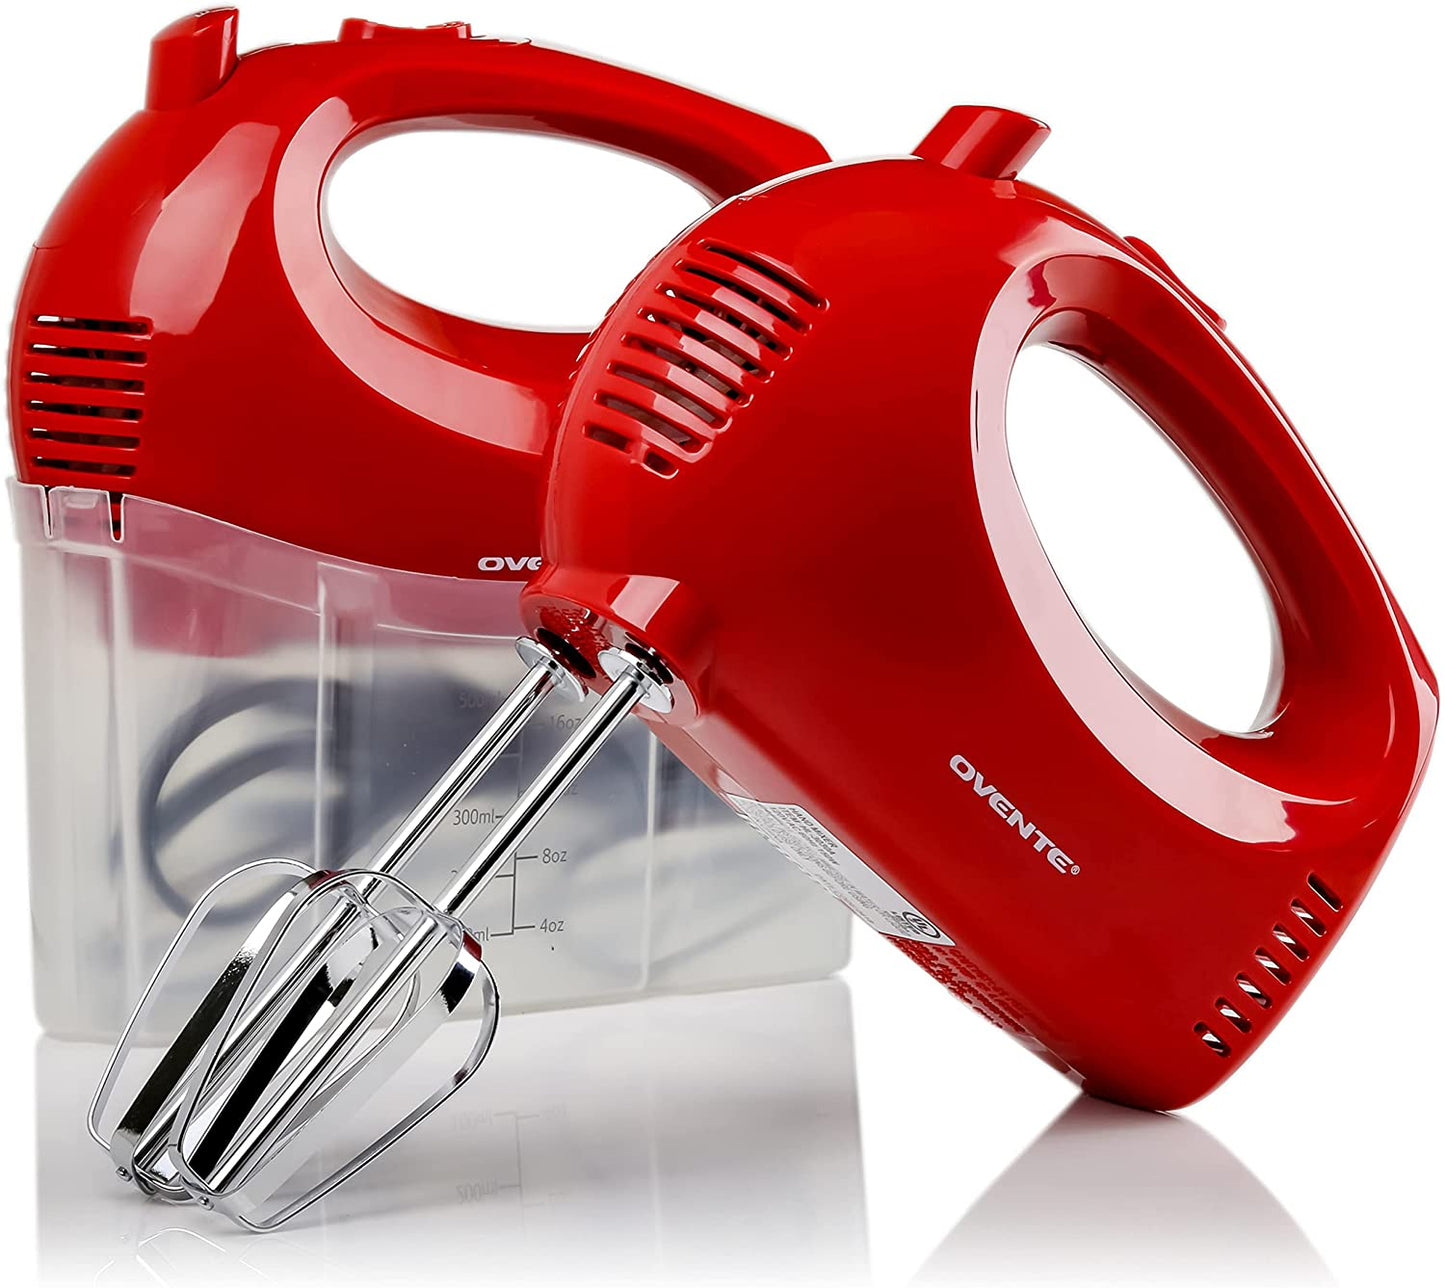 Compact and Powerful Electric Hand Mixer with Stainless Steel Whisk Beater Attachments, Snap Storage Case, and 5 Speed Mixing Functionality 150 Watt, Red